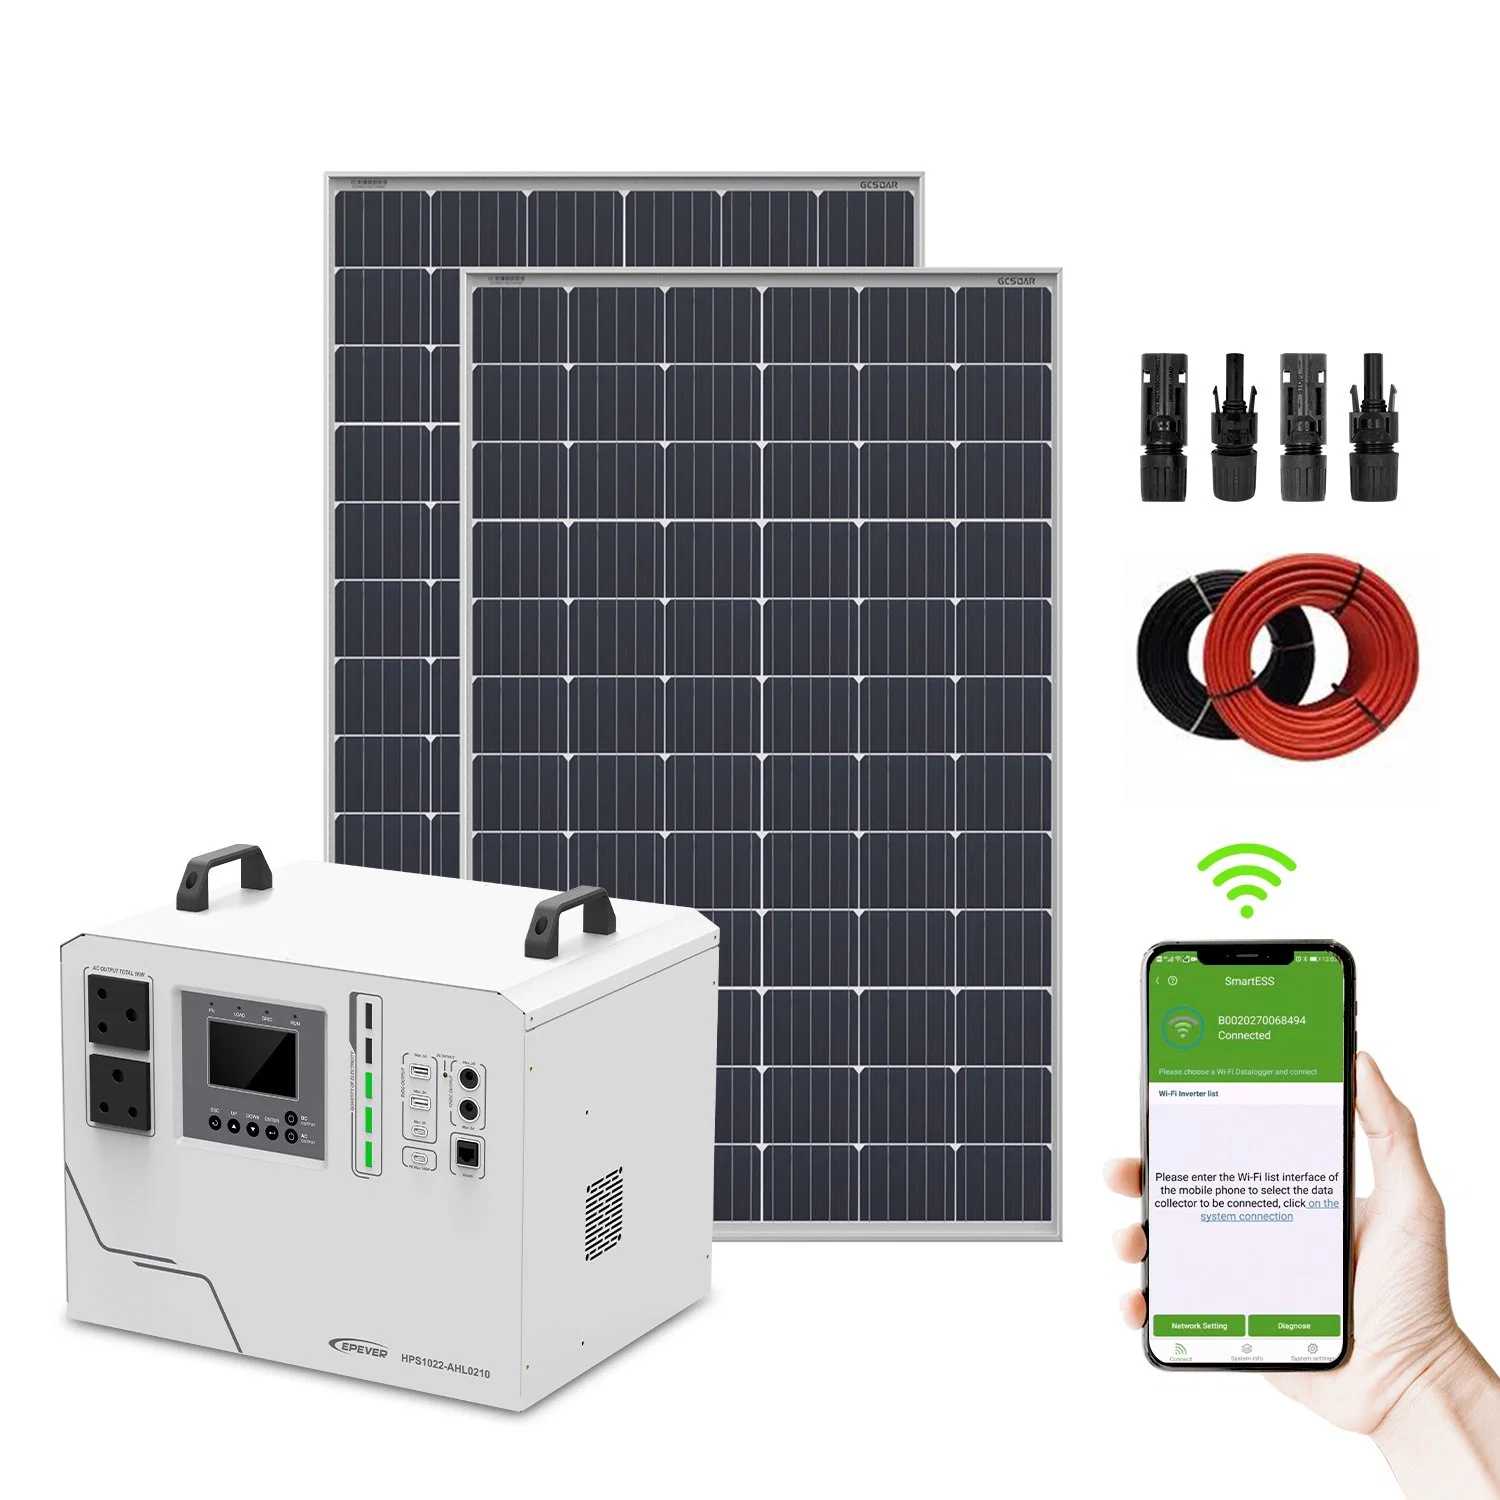 Epever on/off-Grid All-in-One Single Phase Storage Battery 1500W Home Energy Power Generator with Hybrid Inverter